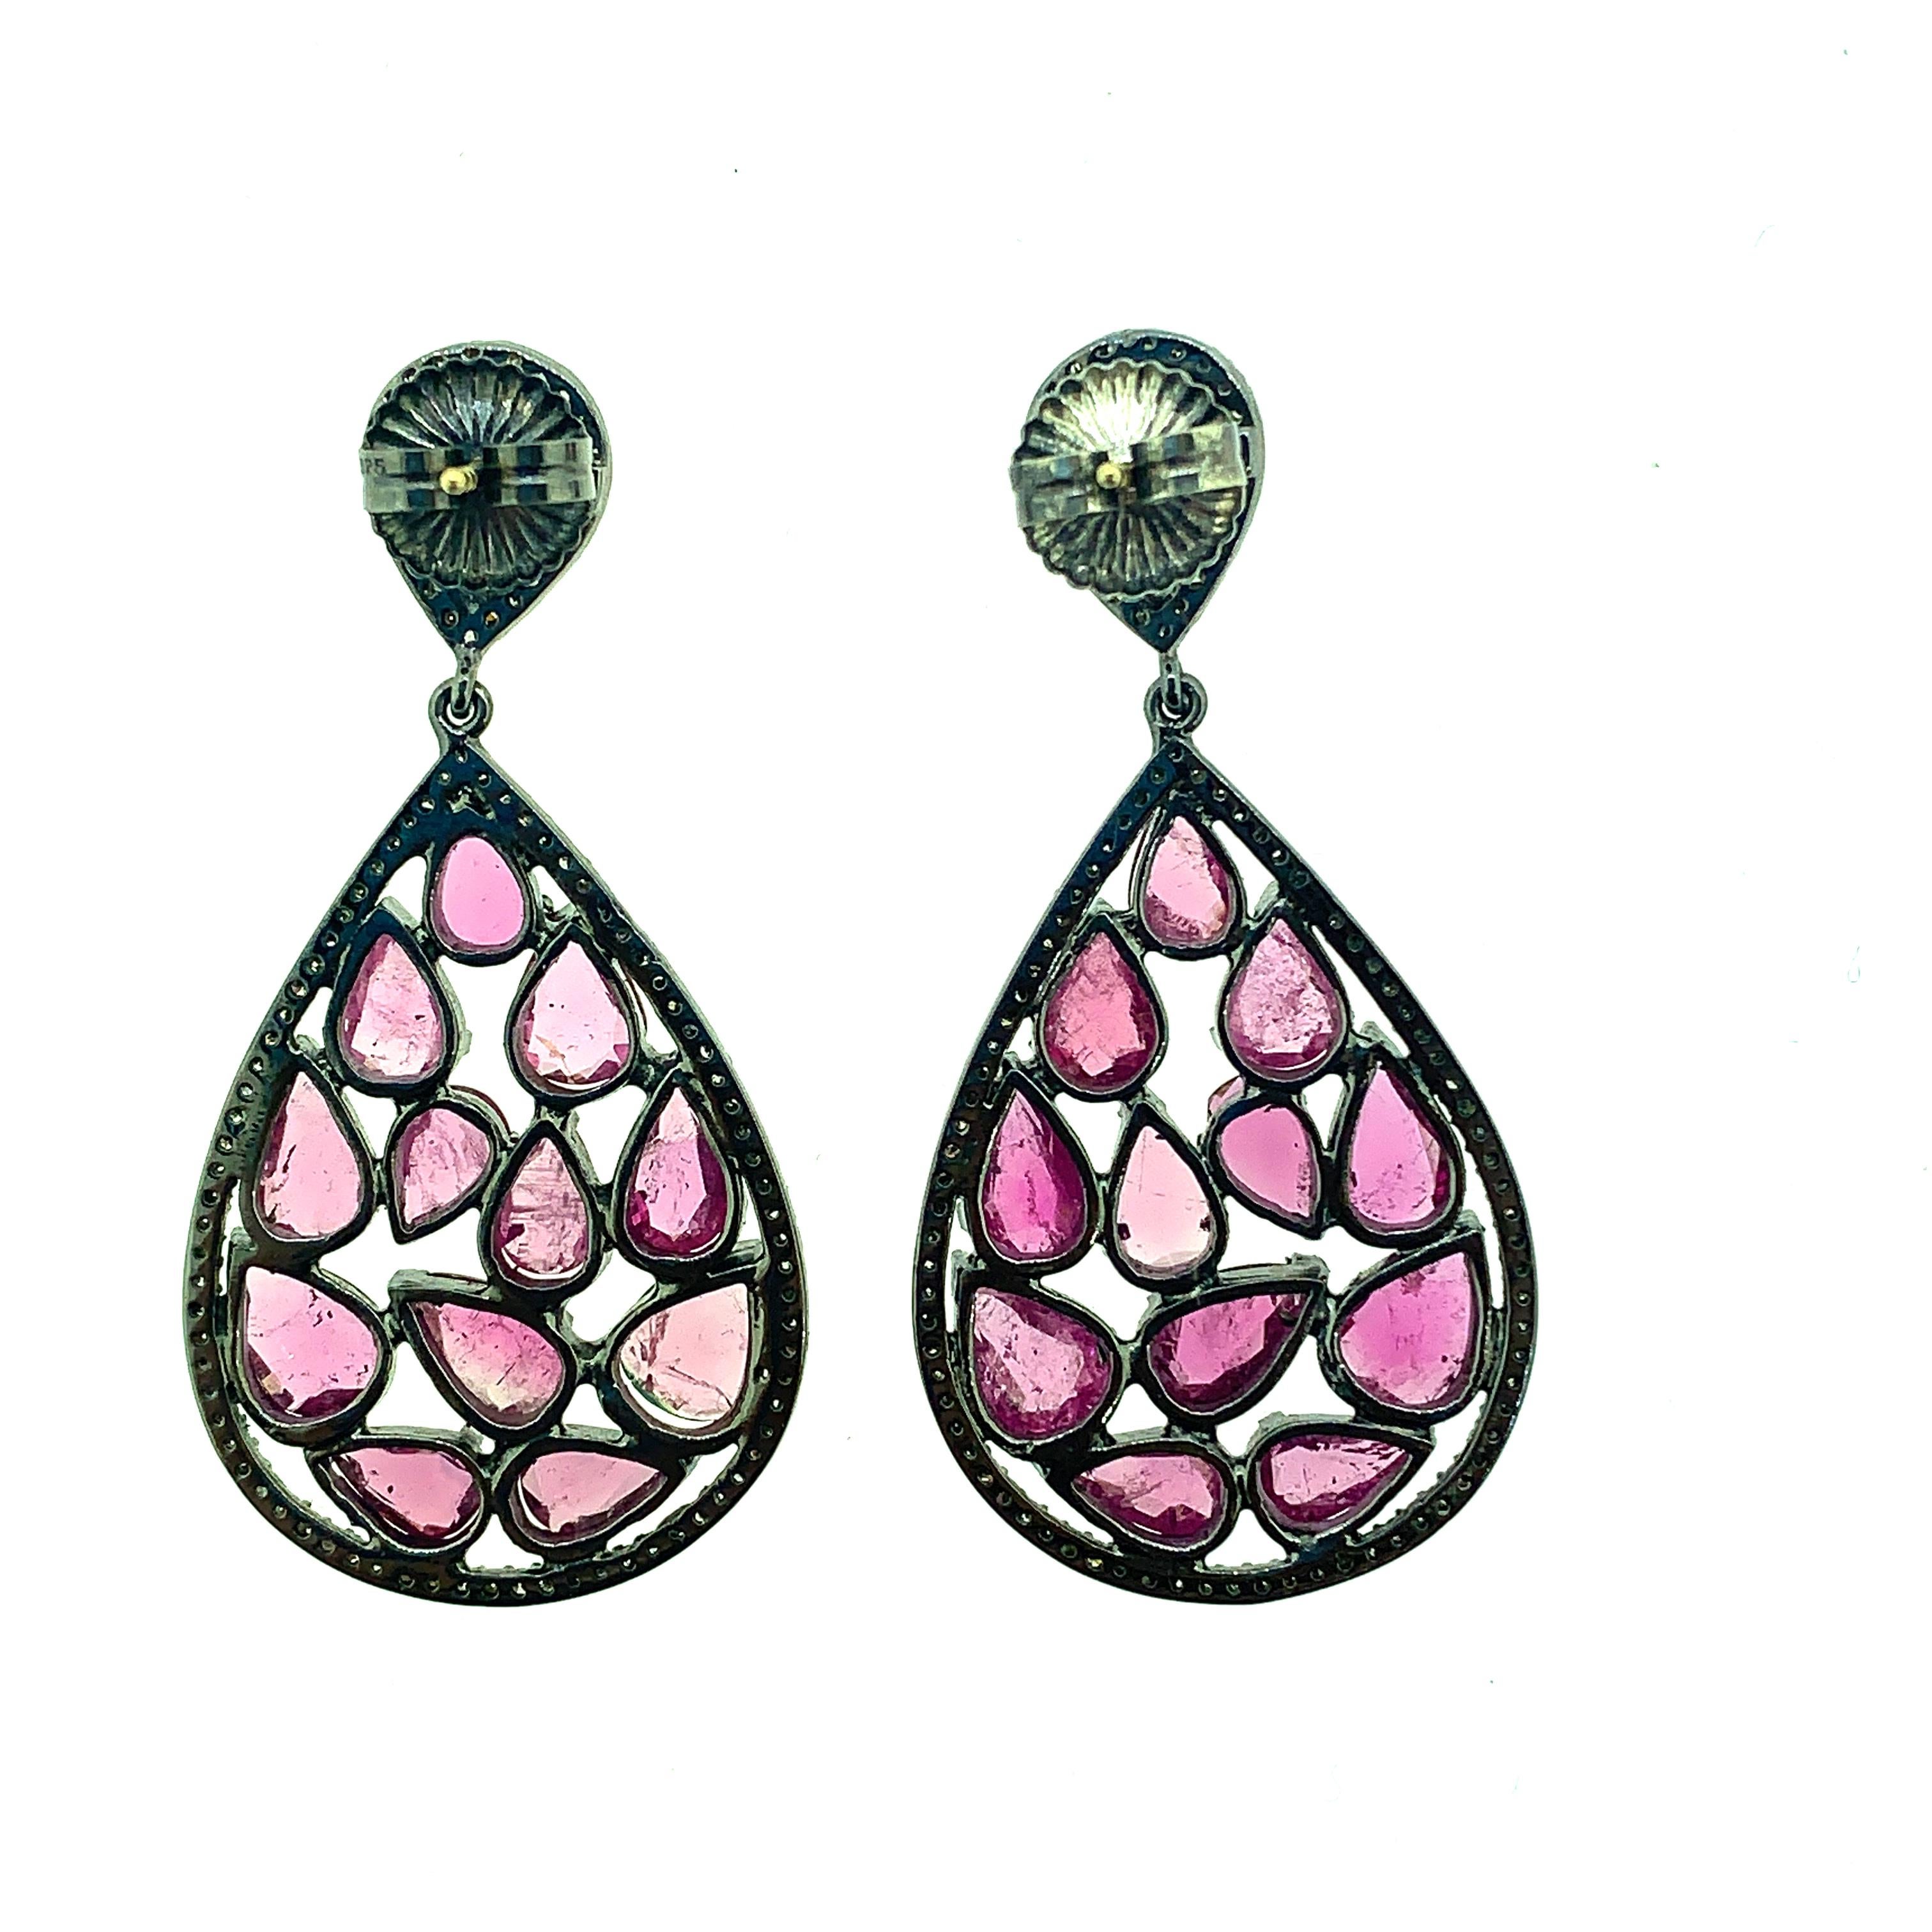 Contemporary 15.60 ct Tourmaline Diamond Earrings in Oxidized Sterling Silver with 14KT Gold For Sale